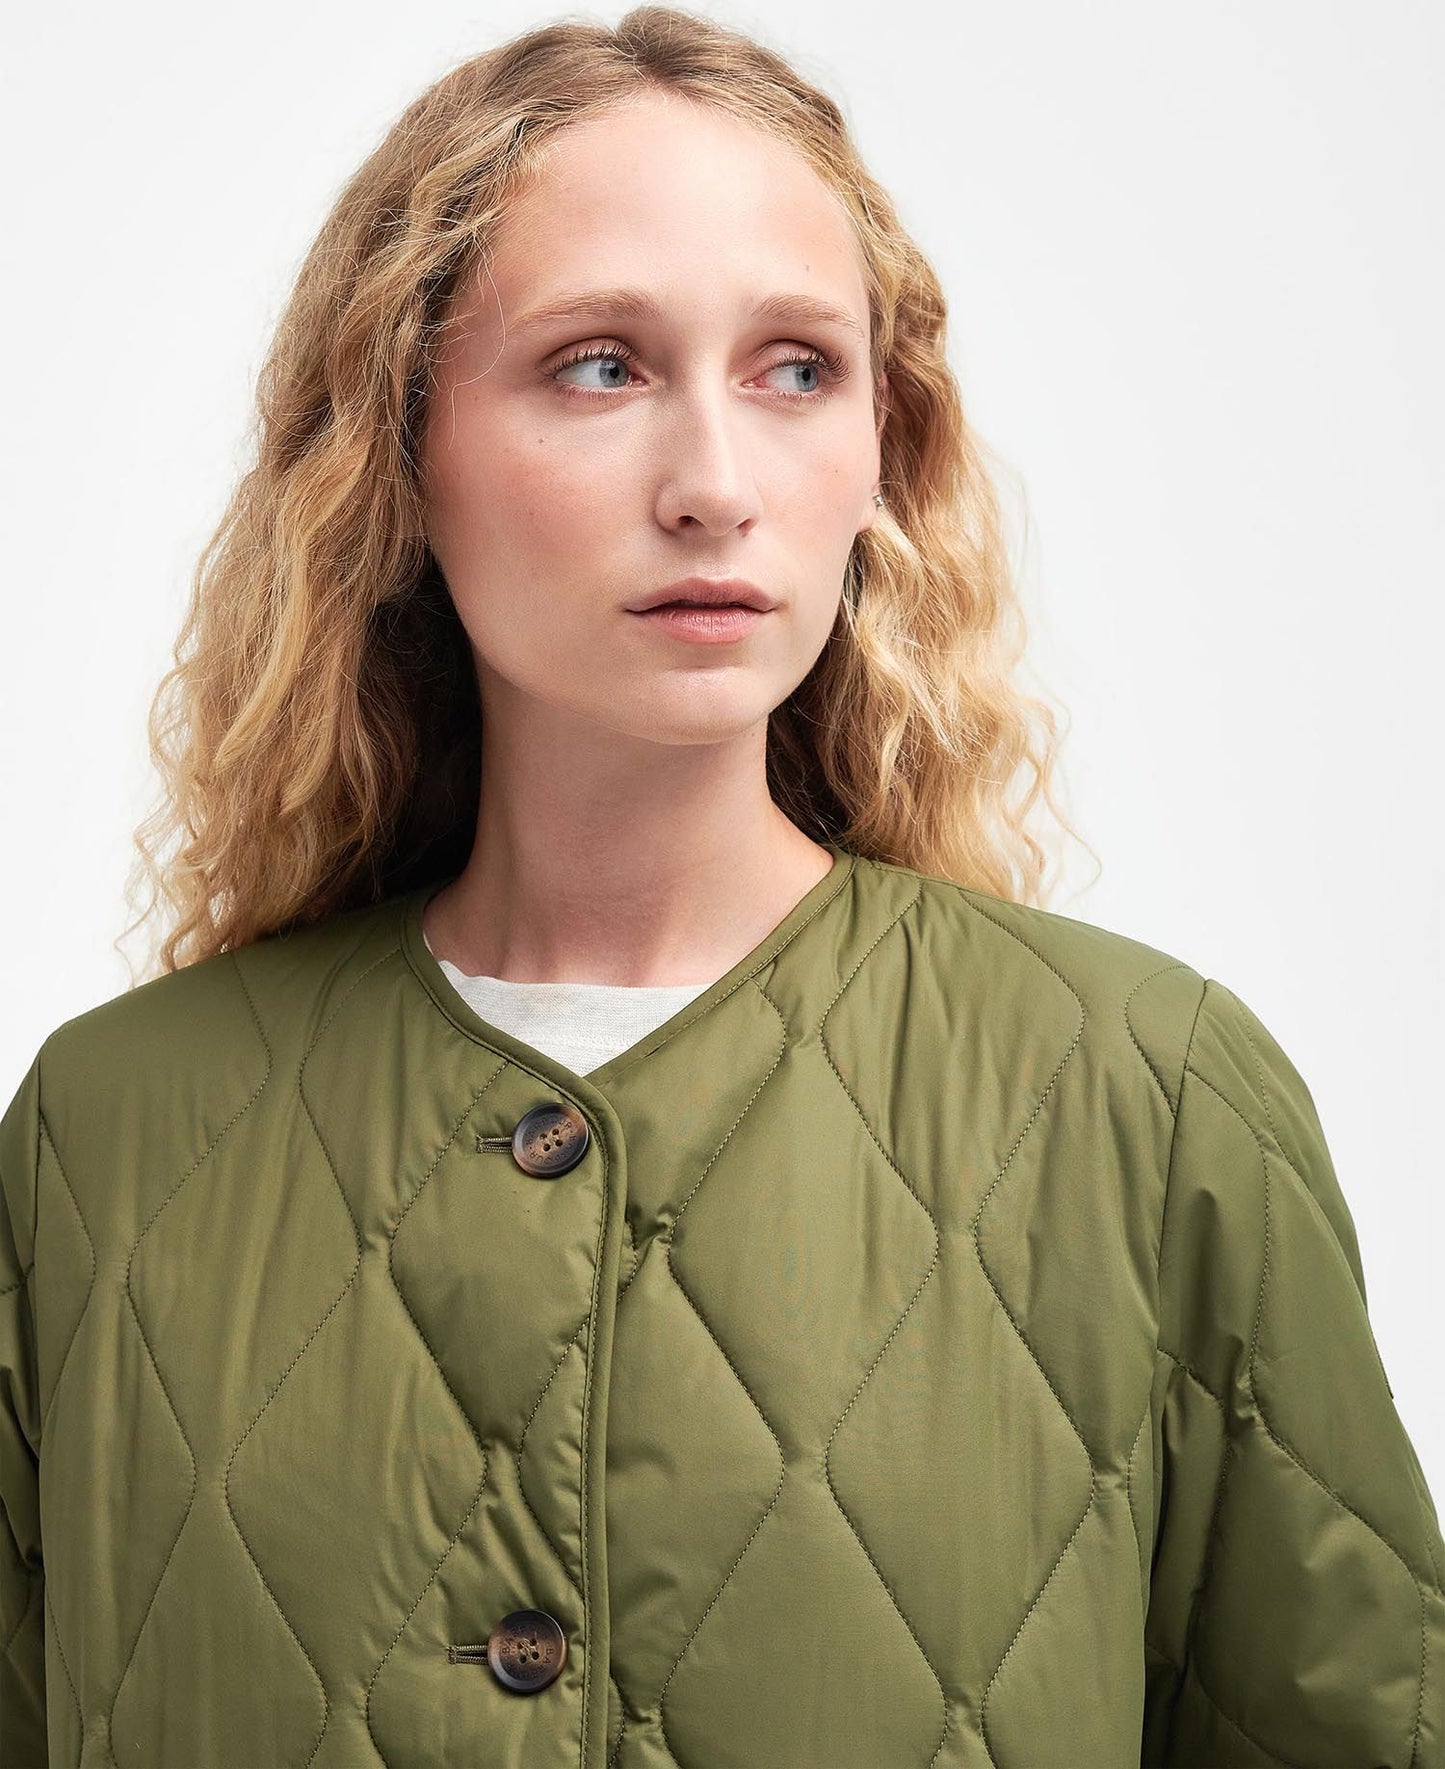 Barbour Jacket Woman Bickland Quilt Olive Classic